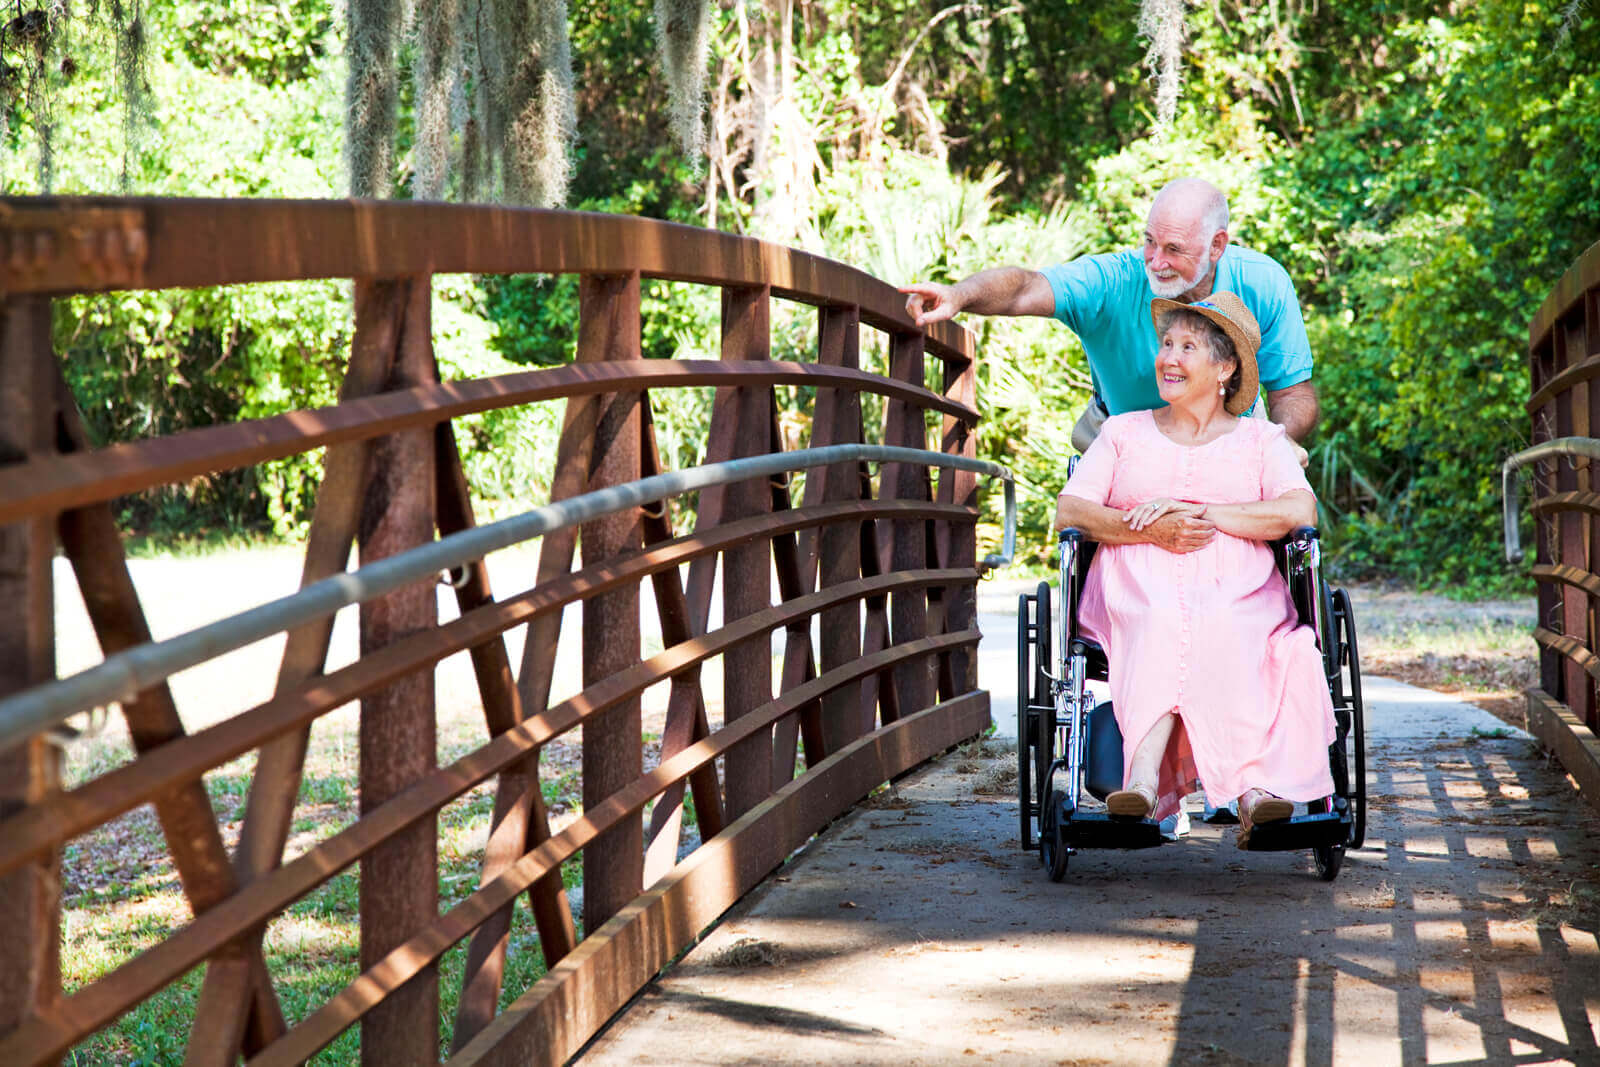 Travel tips for those travelling with a wheelchair, limited mobilityy or disability